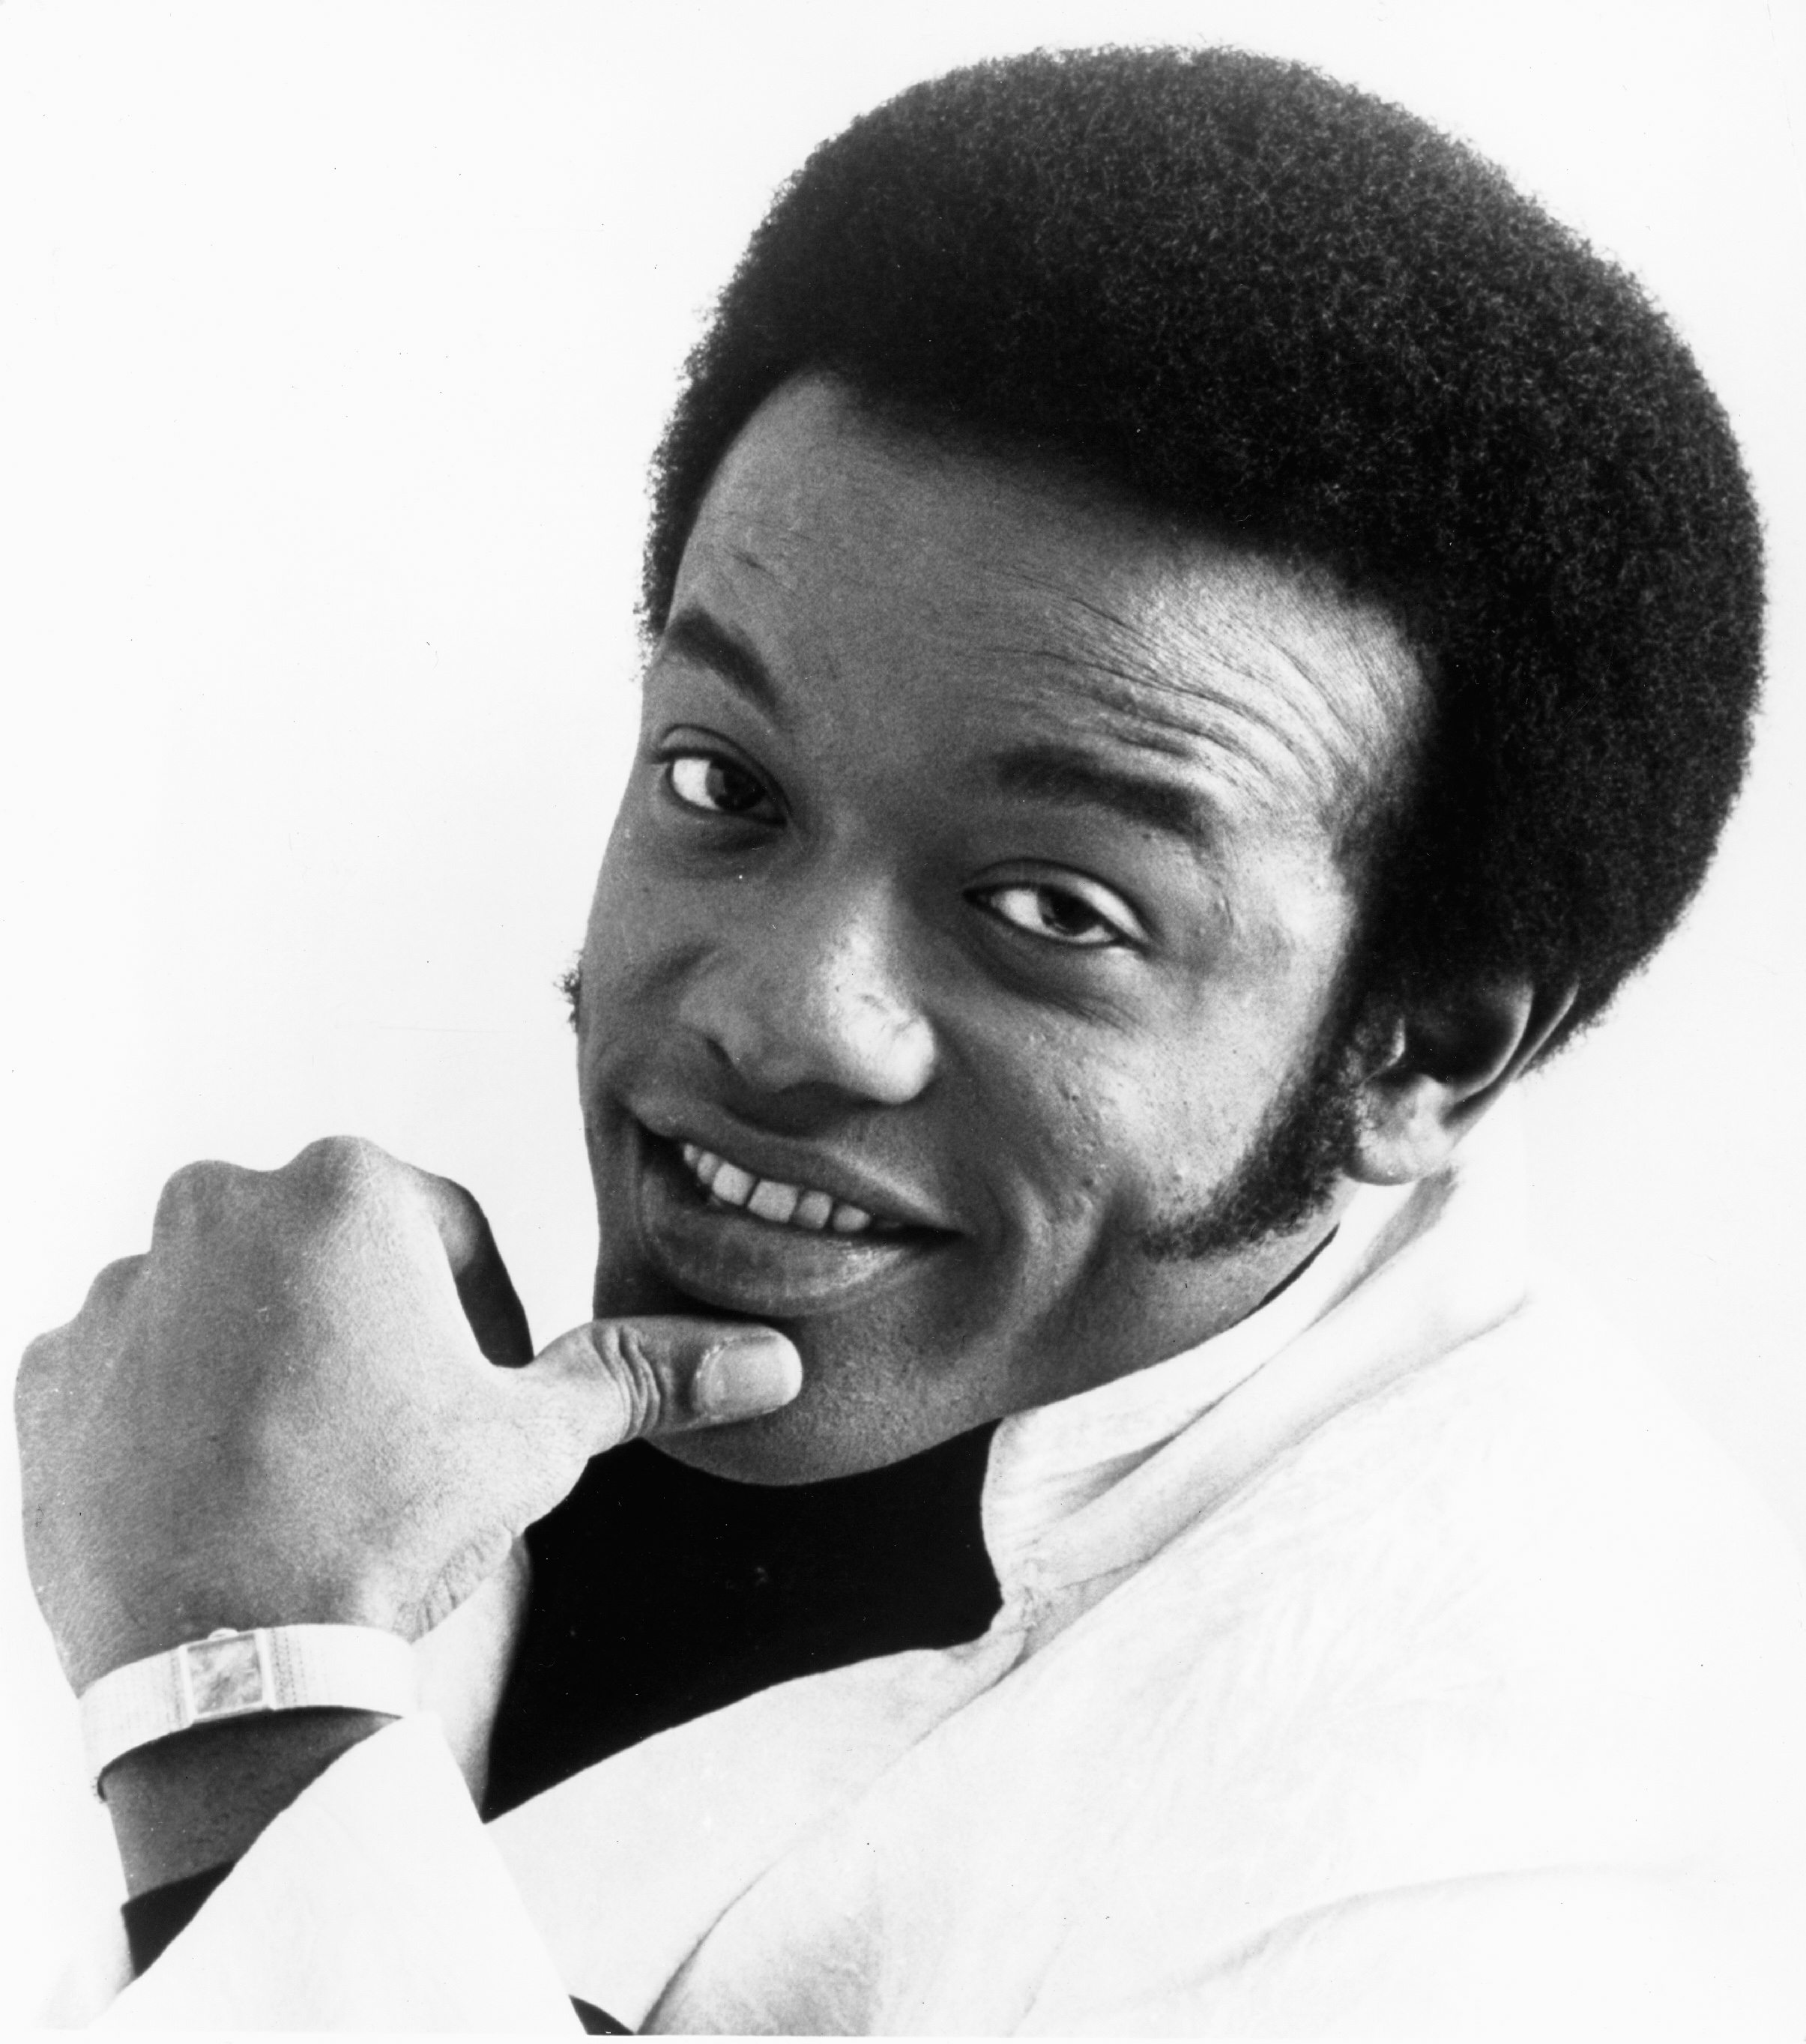 Bobby Womack in a studio portrait circa 1969 | Source: Getty Images